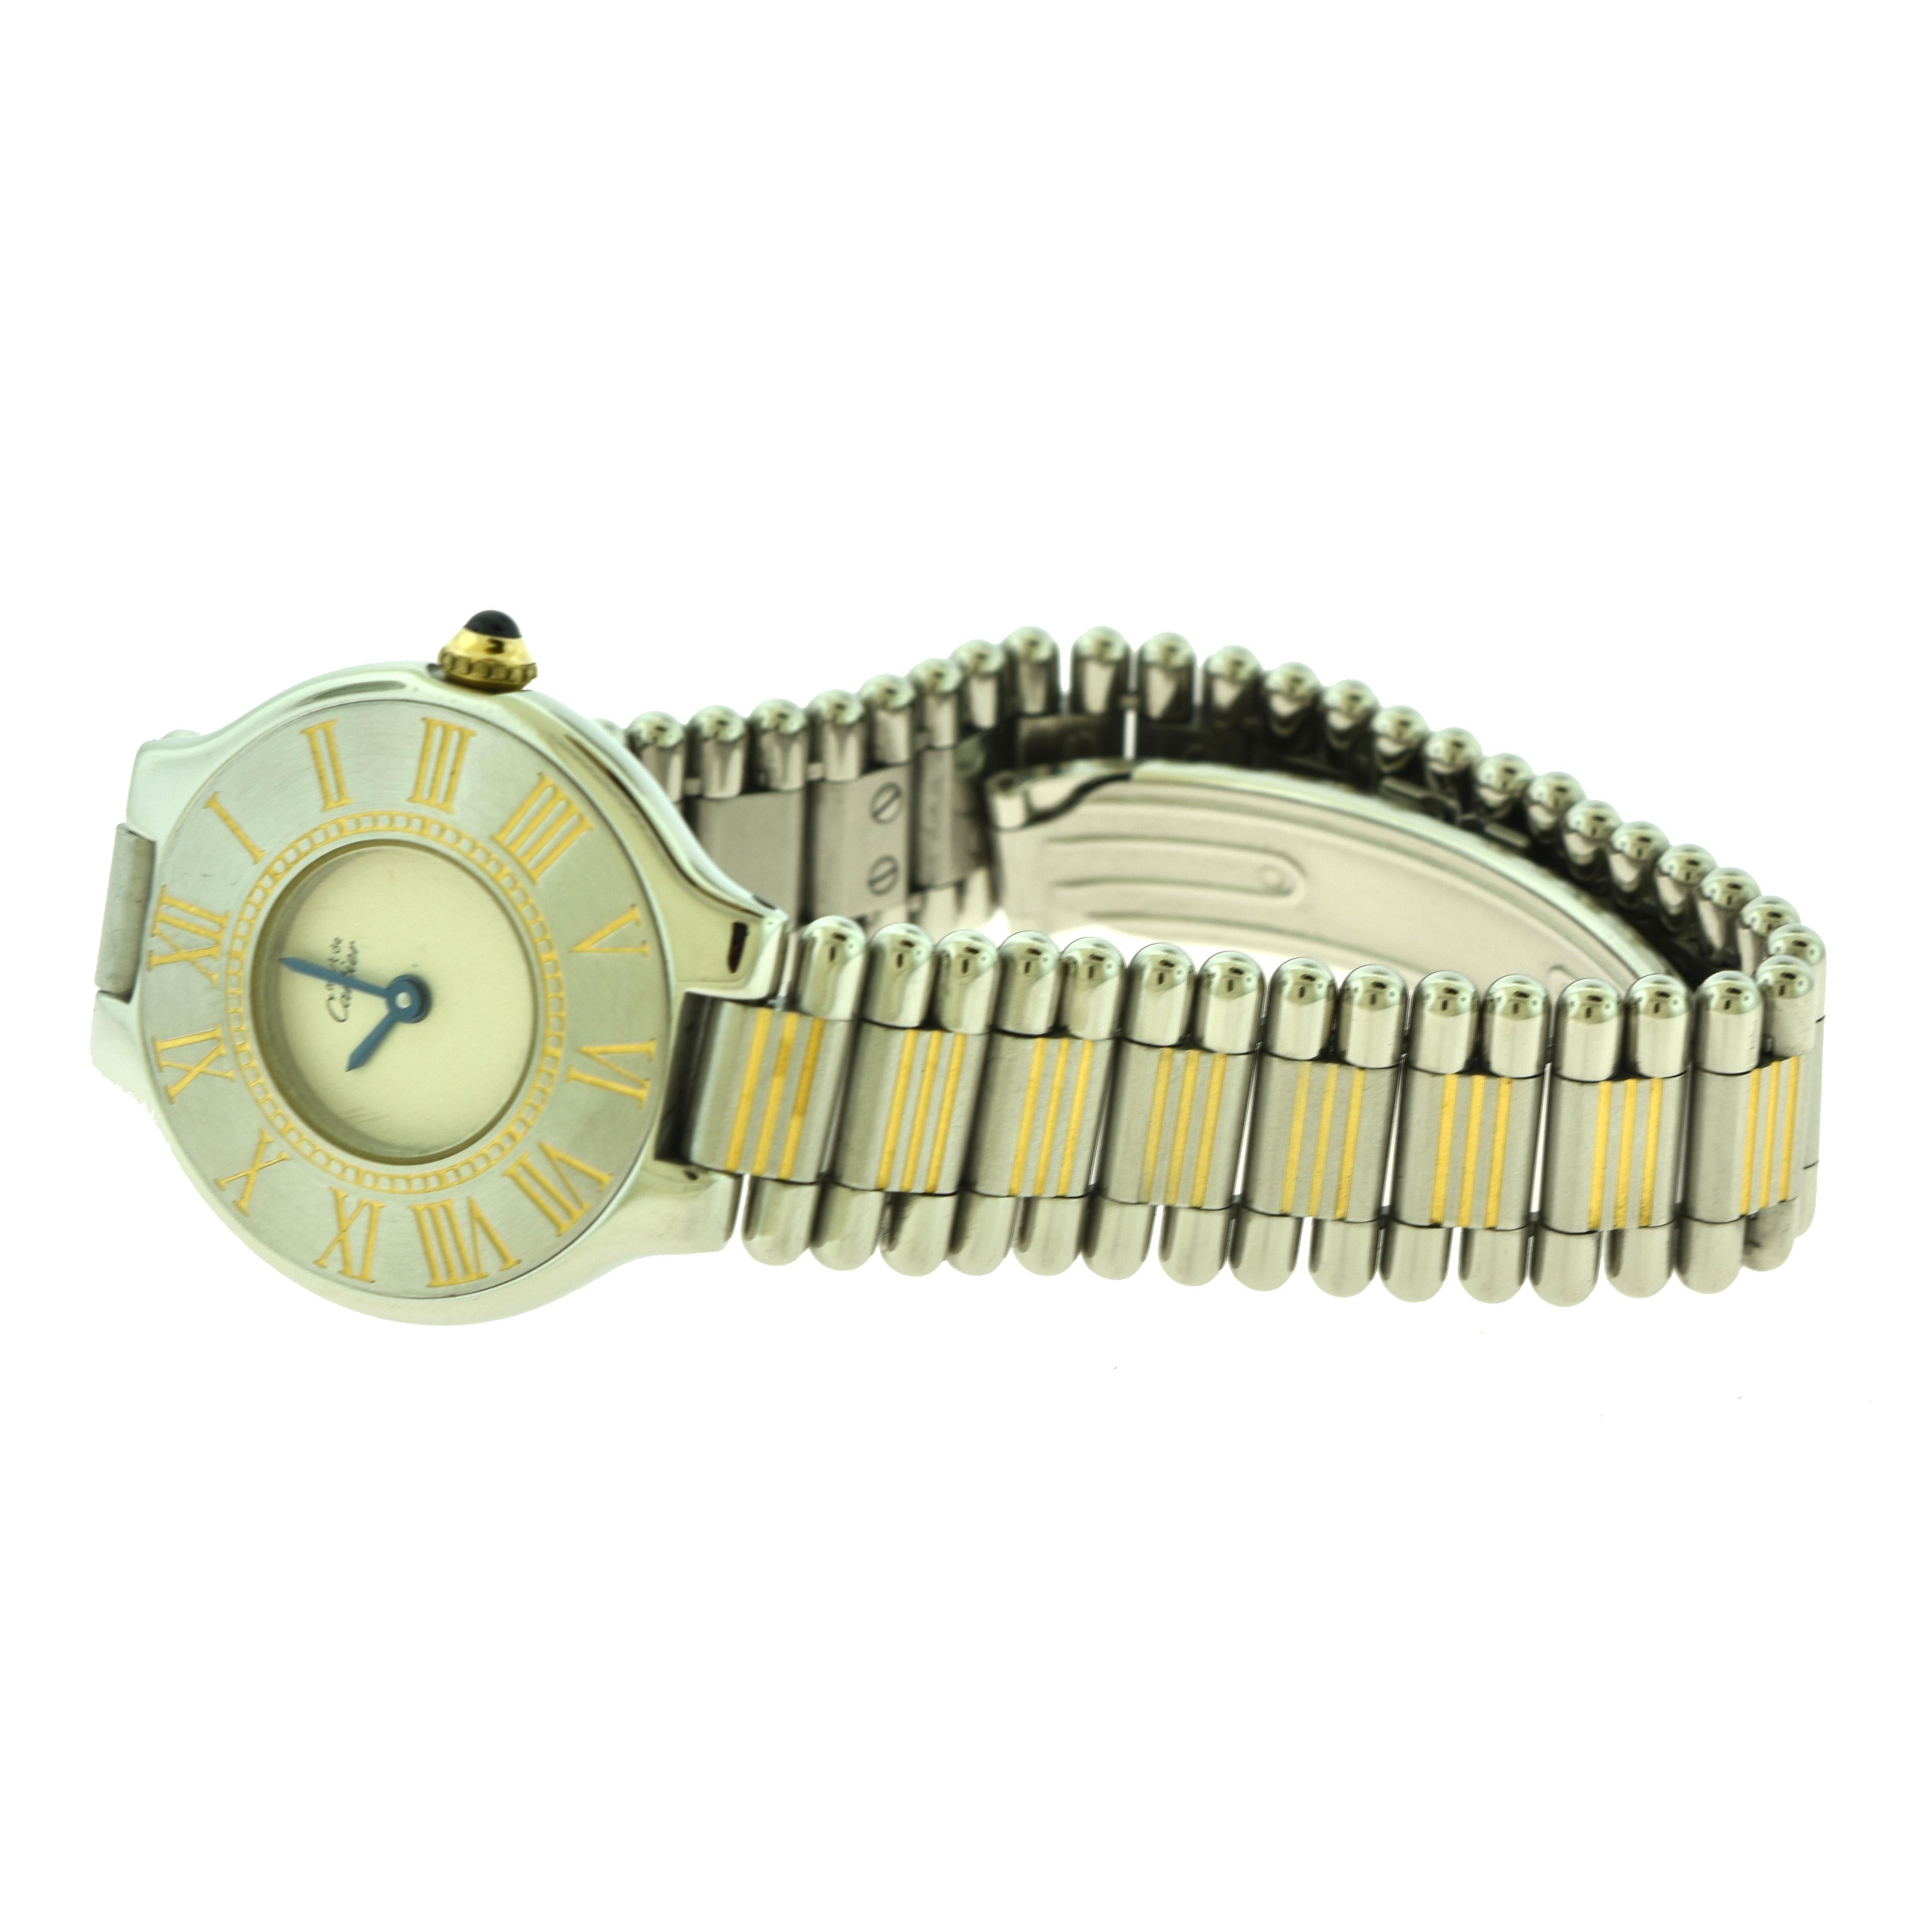 Brilliance Jewels, Miami
Questions? Call Us Anytime!
786,482,8100

Brand: Cartier

Model Name: Must de Cartier

Movement: Quartz

Case Size: 30 mm

Case Material: Stainless Steel

Bracelet Material: 18k Yellow Gold / Stainless Steel

Dial Color: